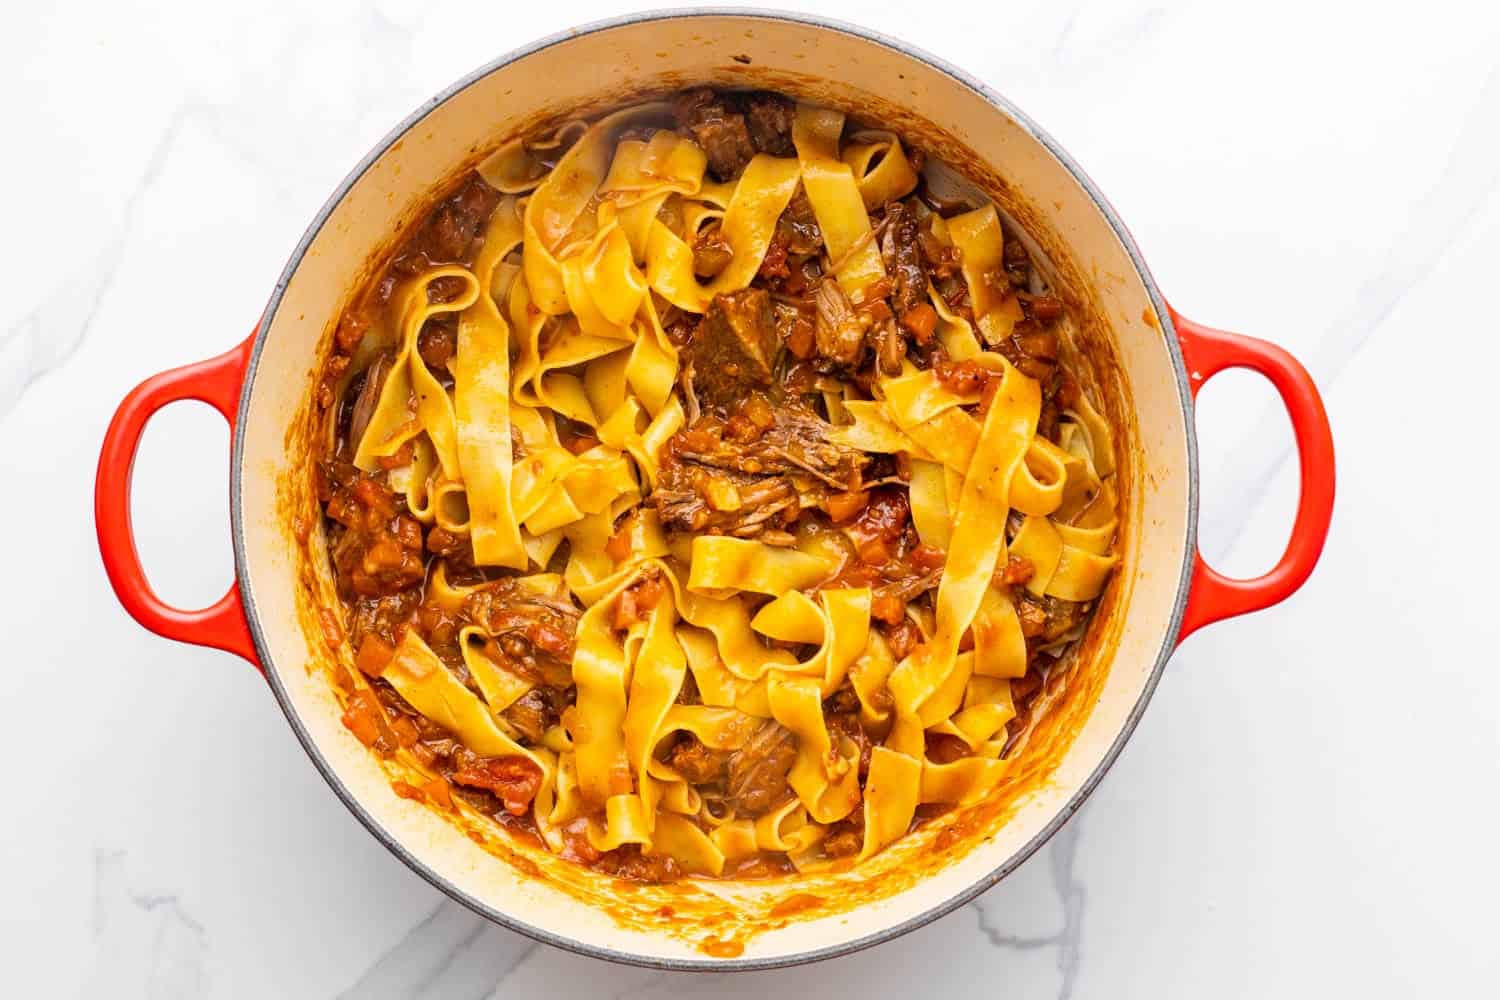 pappardelle pasta tossed with shredded beef ragu. 